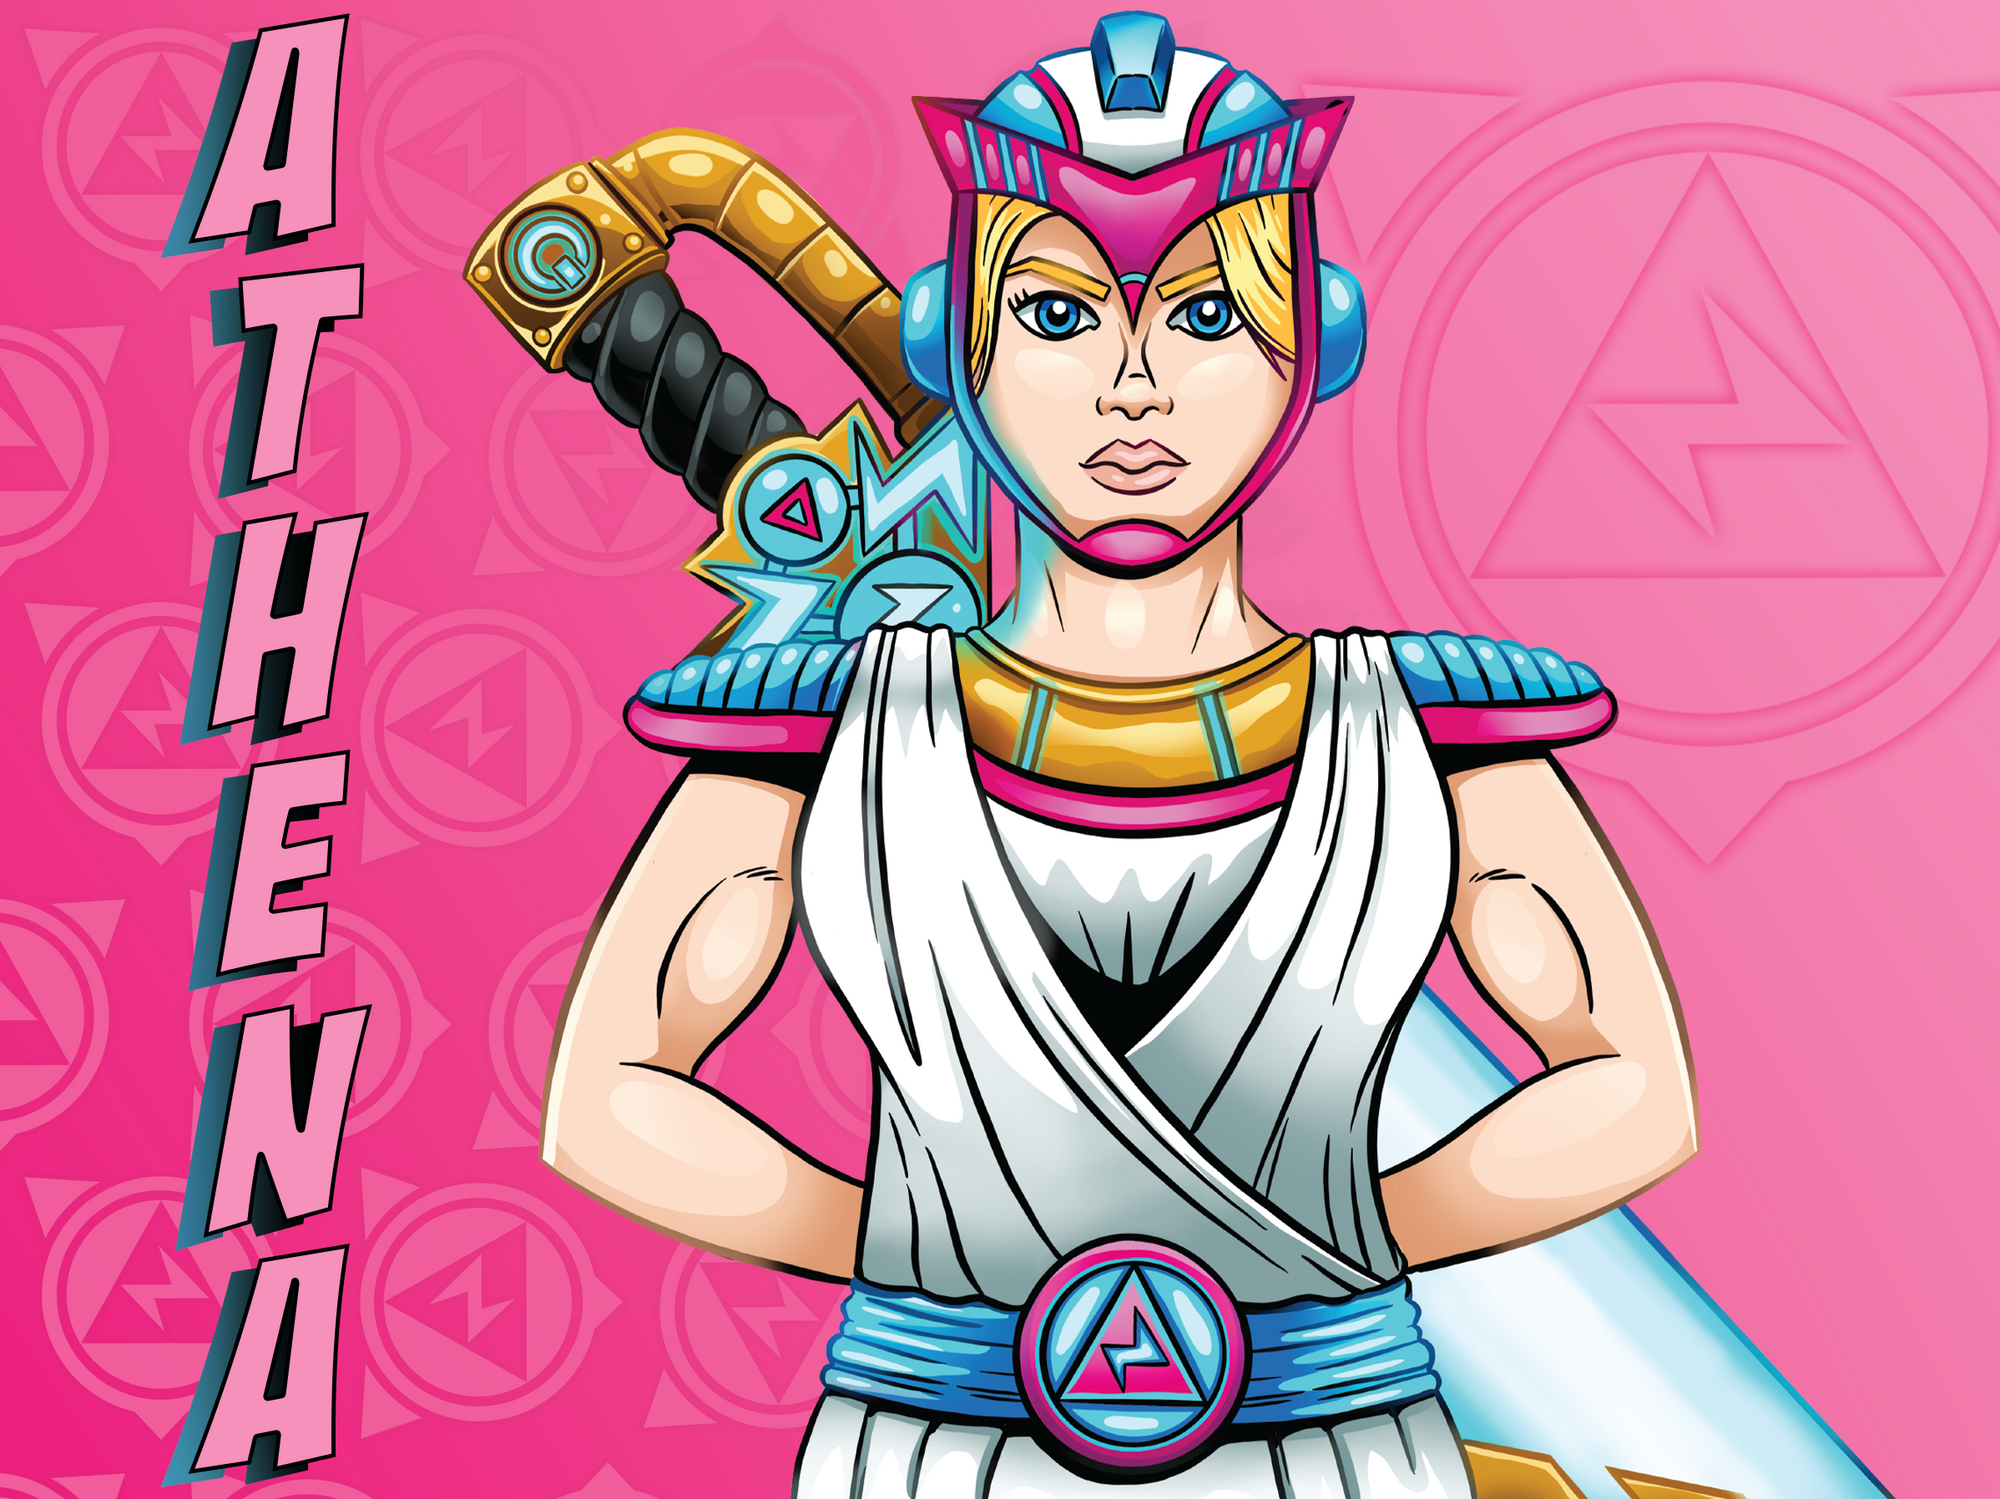 "Comic style Greek Mythology character, with large sword, lightning bolt belt, and magenta cyborg battle ready helmet with circular electricity icon in background, with name title Athena "